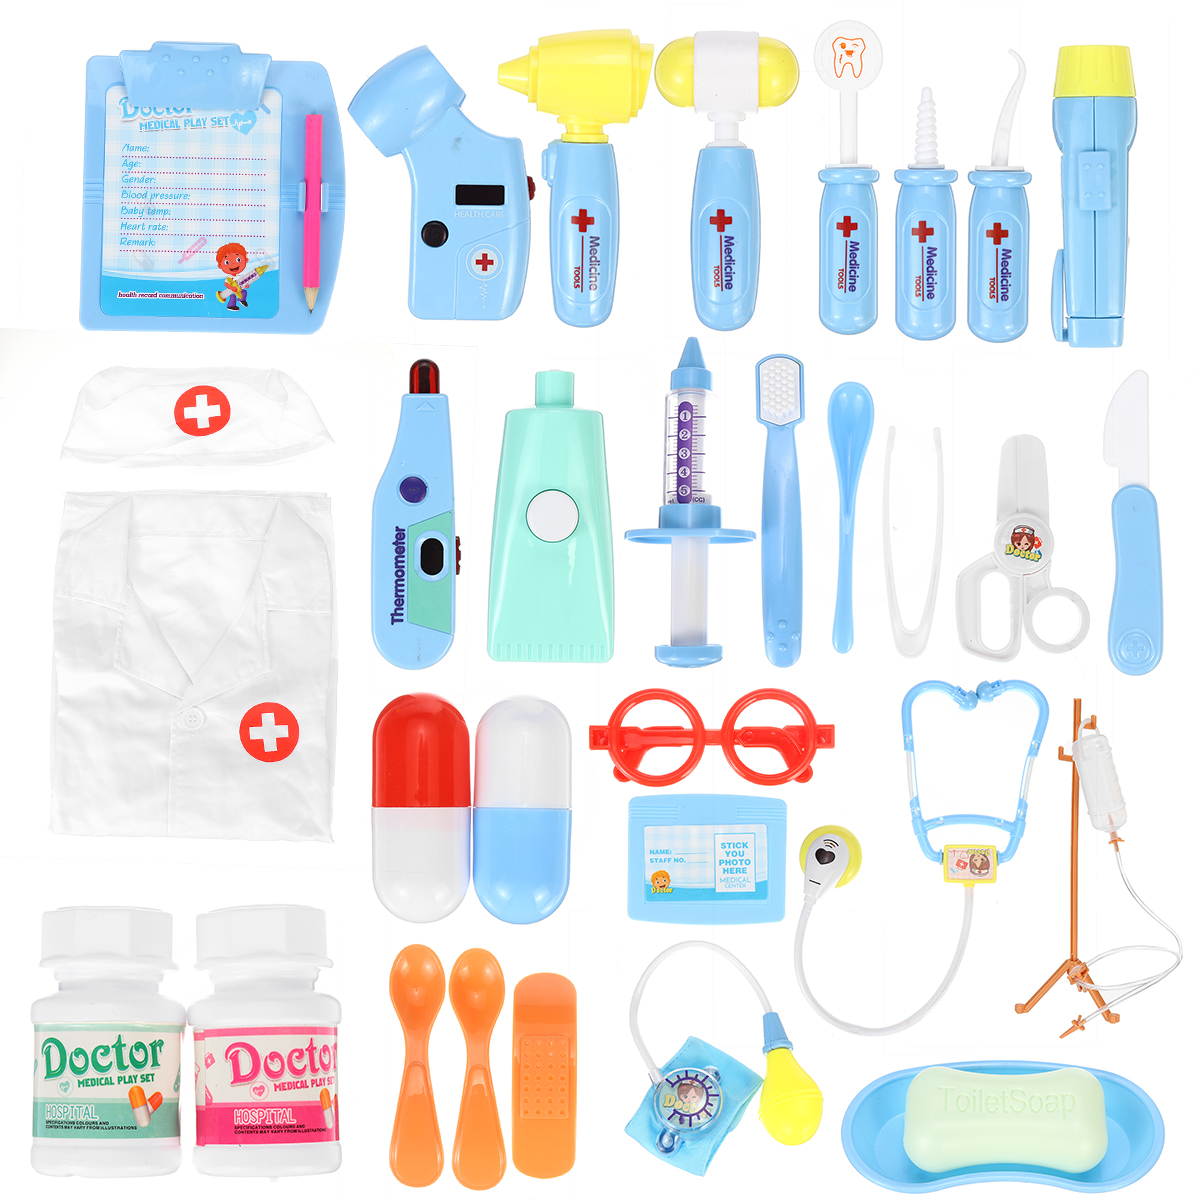 35-Pcs-Simulation-Medical-Role-Play-Pretend-Doctor-Game-Equipment-Set-Educational-Toy-with-Box-for-K-1730581-2